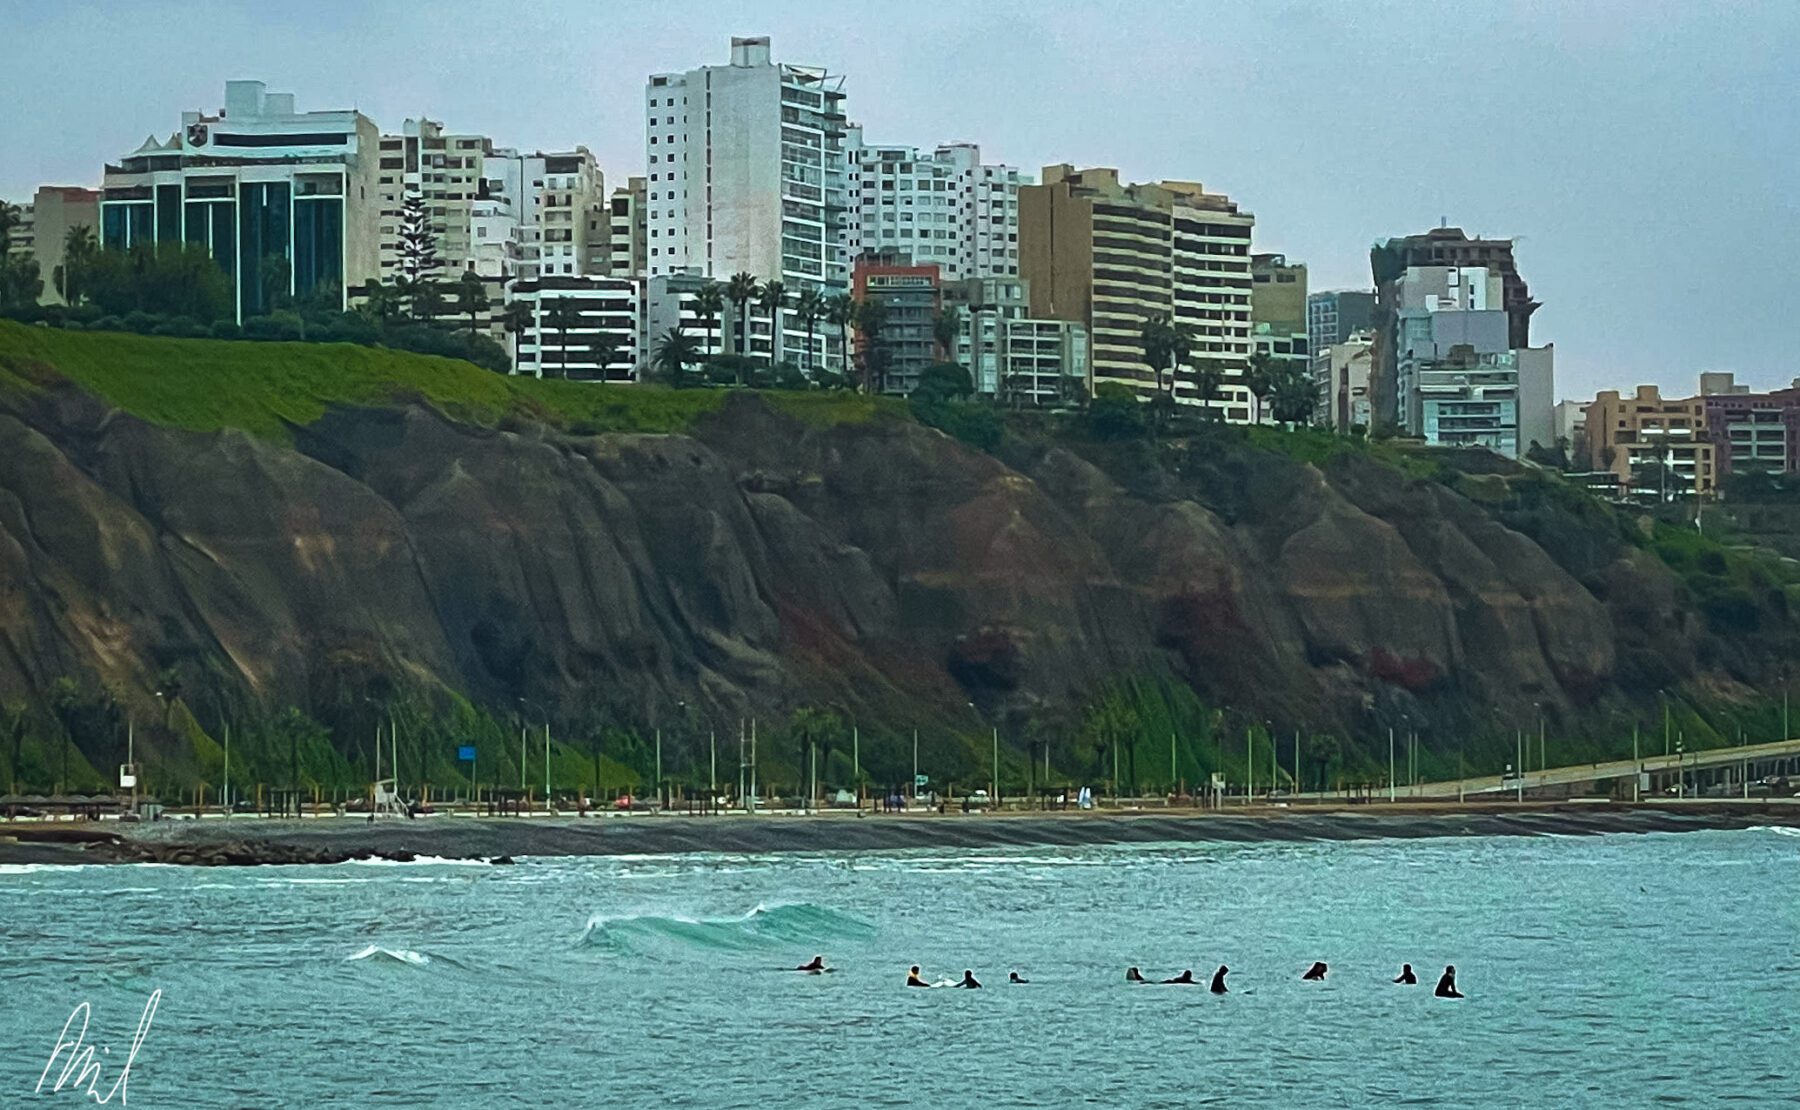 A group of people are surfing in the ocean near Peru.